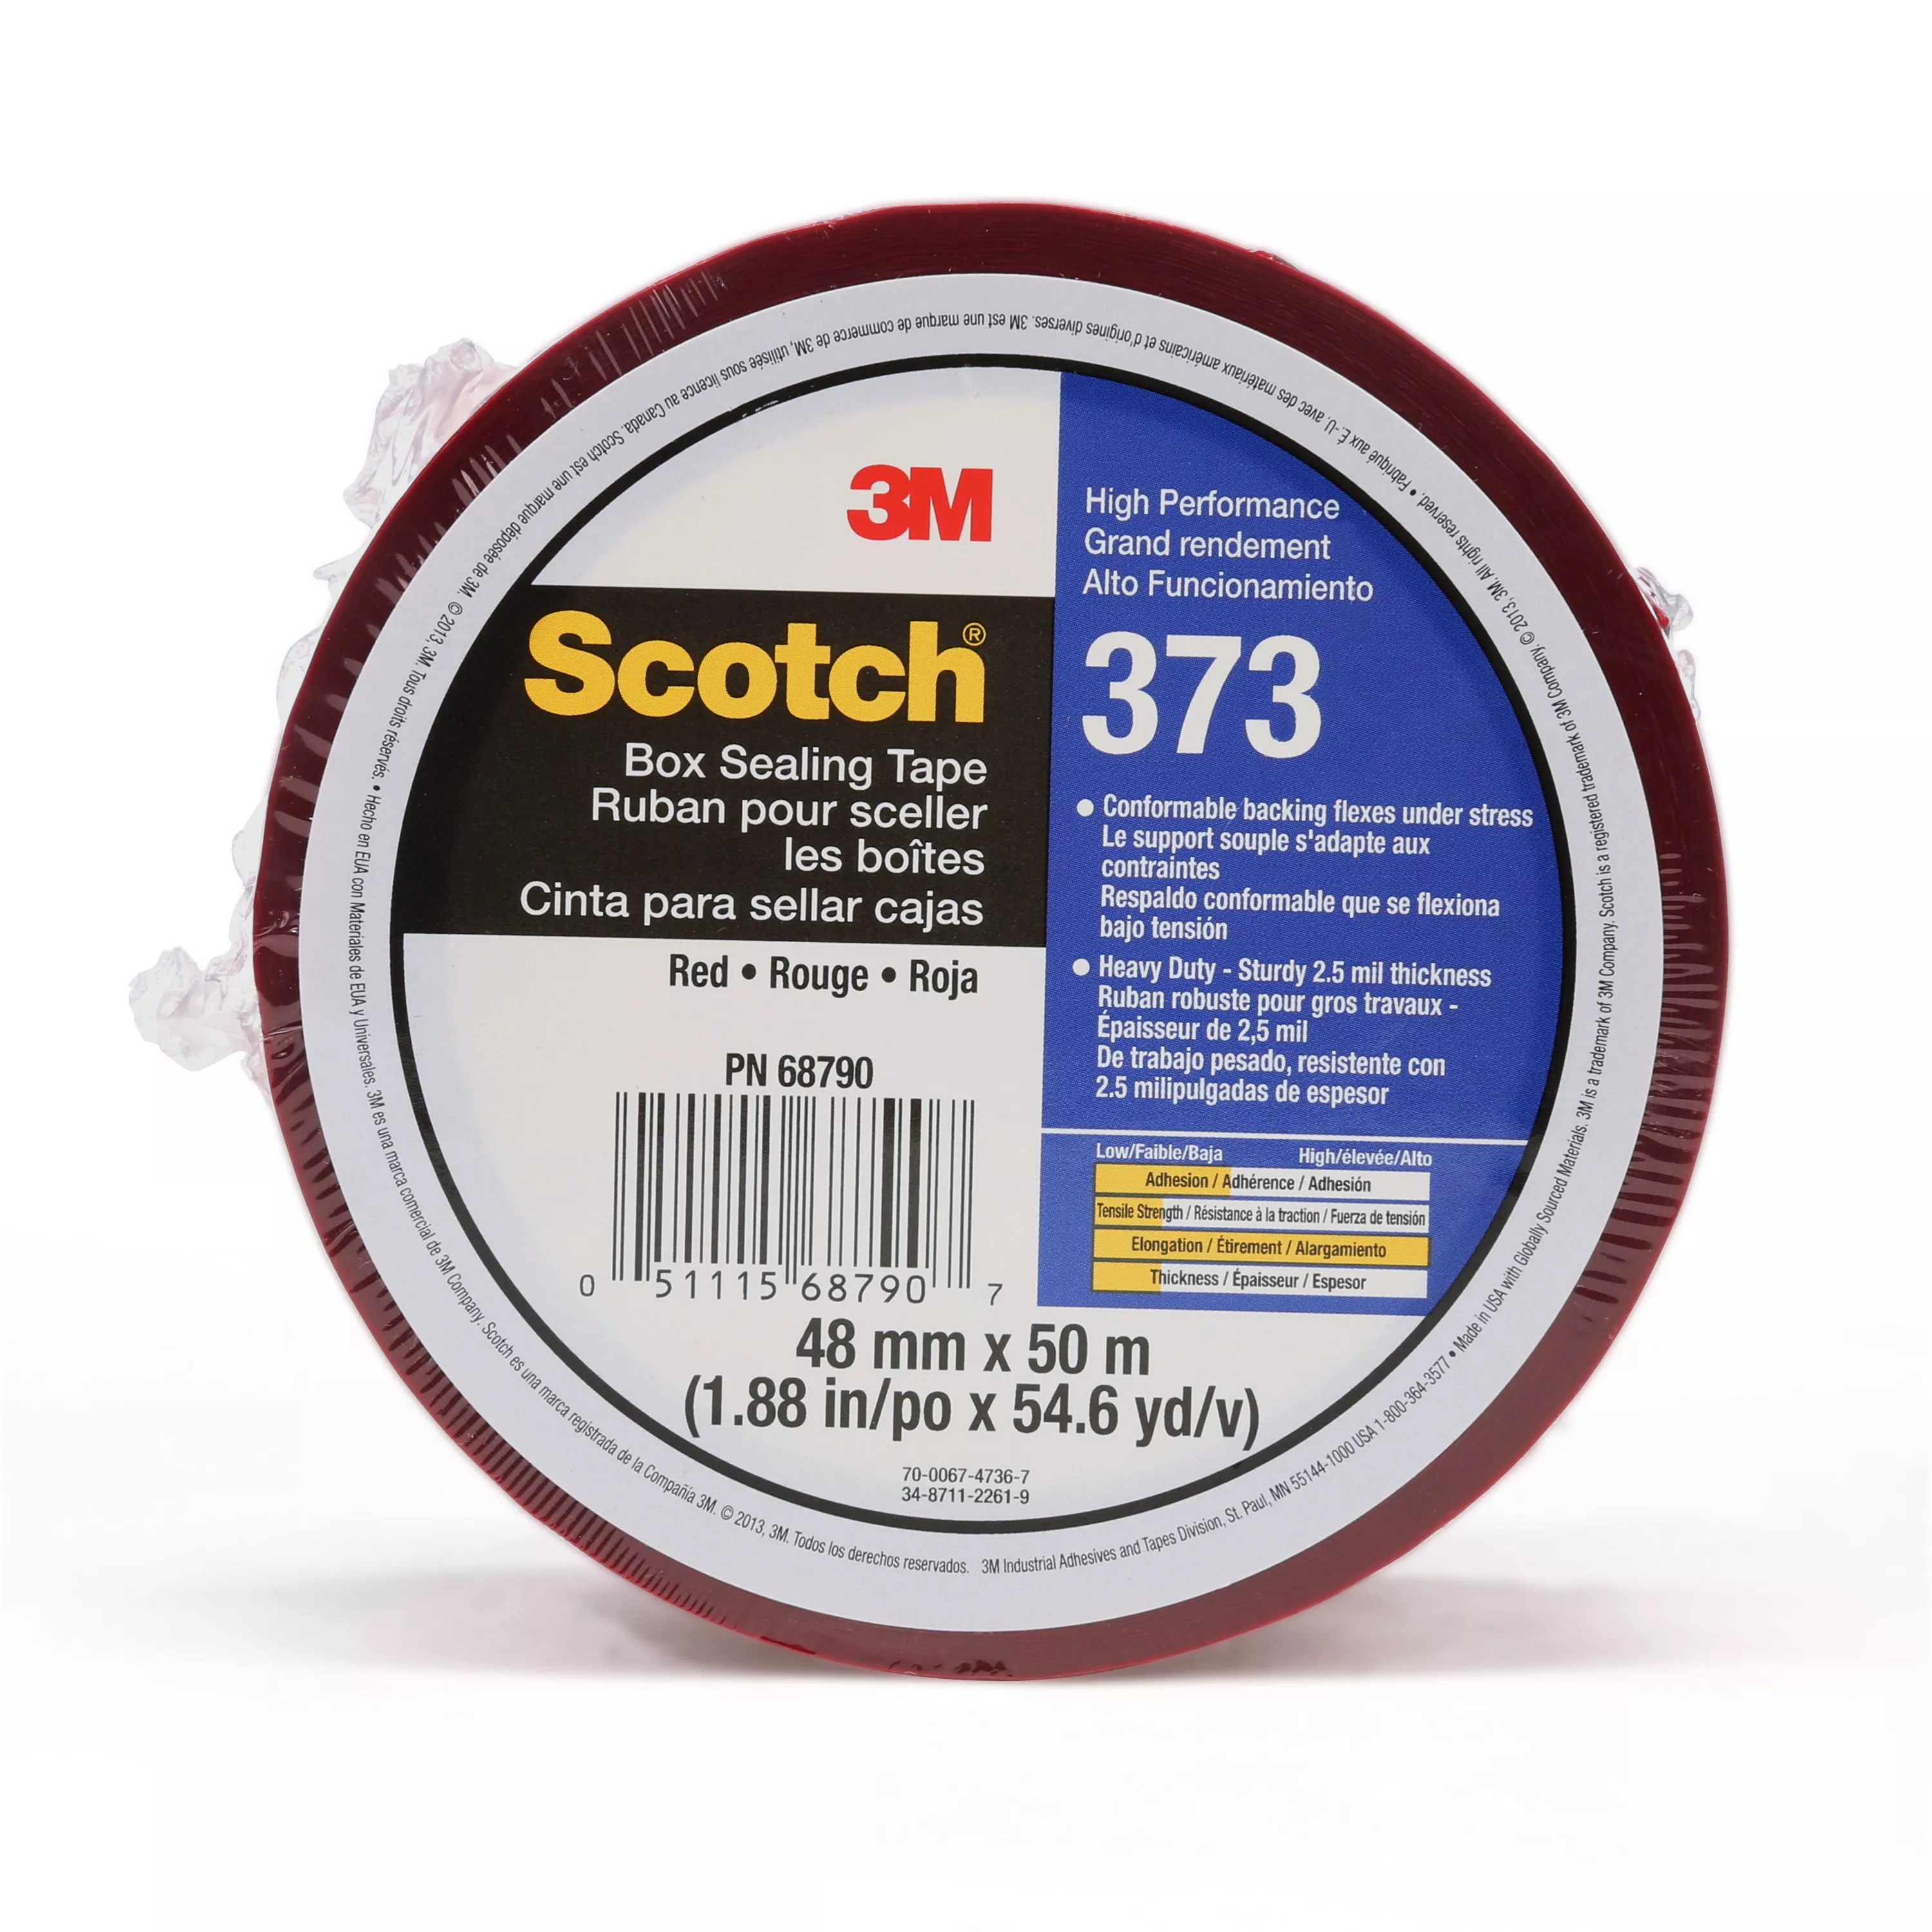 Scotch® Box Sealing Tape 373, Red, 48 mm x 50 m, 36/Case, Individually
Wrapped Conveniently Packaged